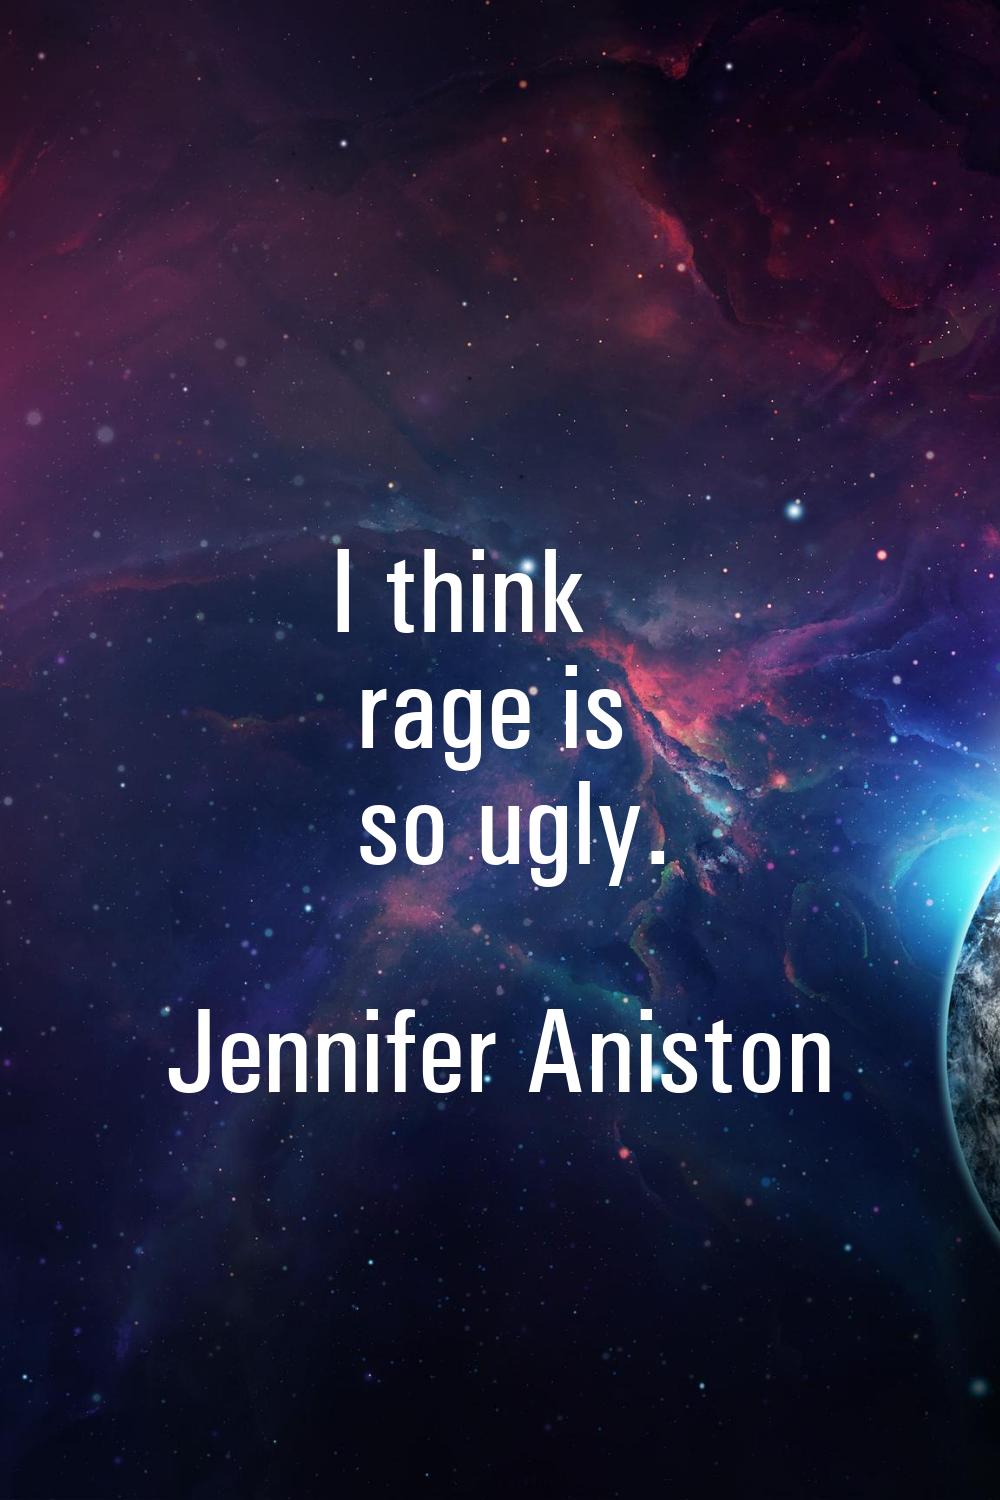 I think rage is so ugly.